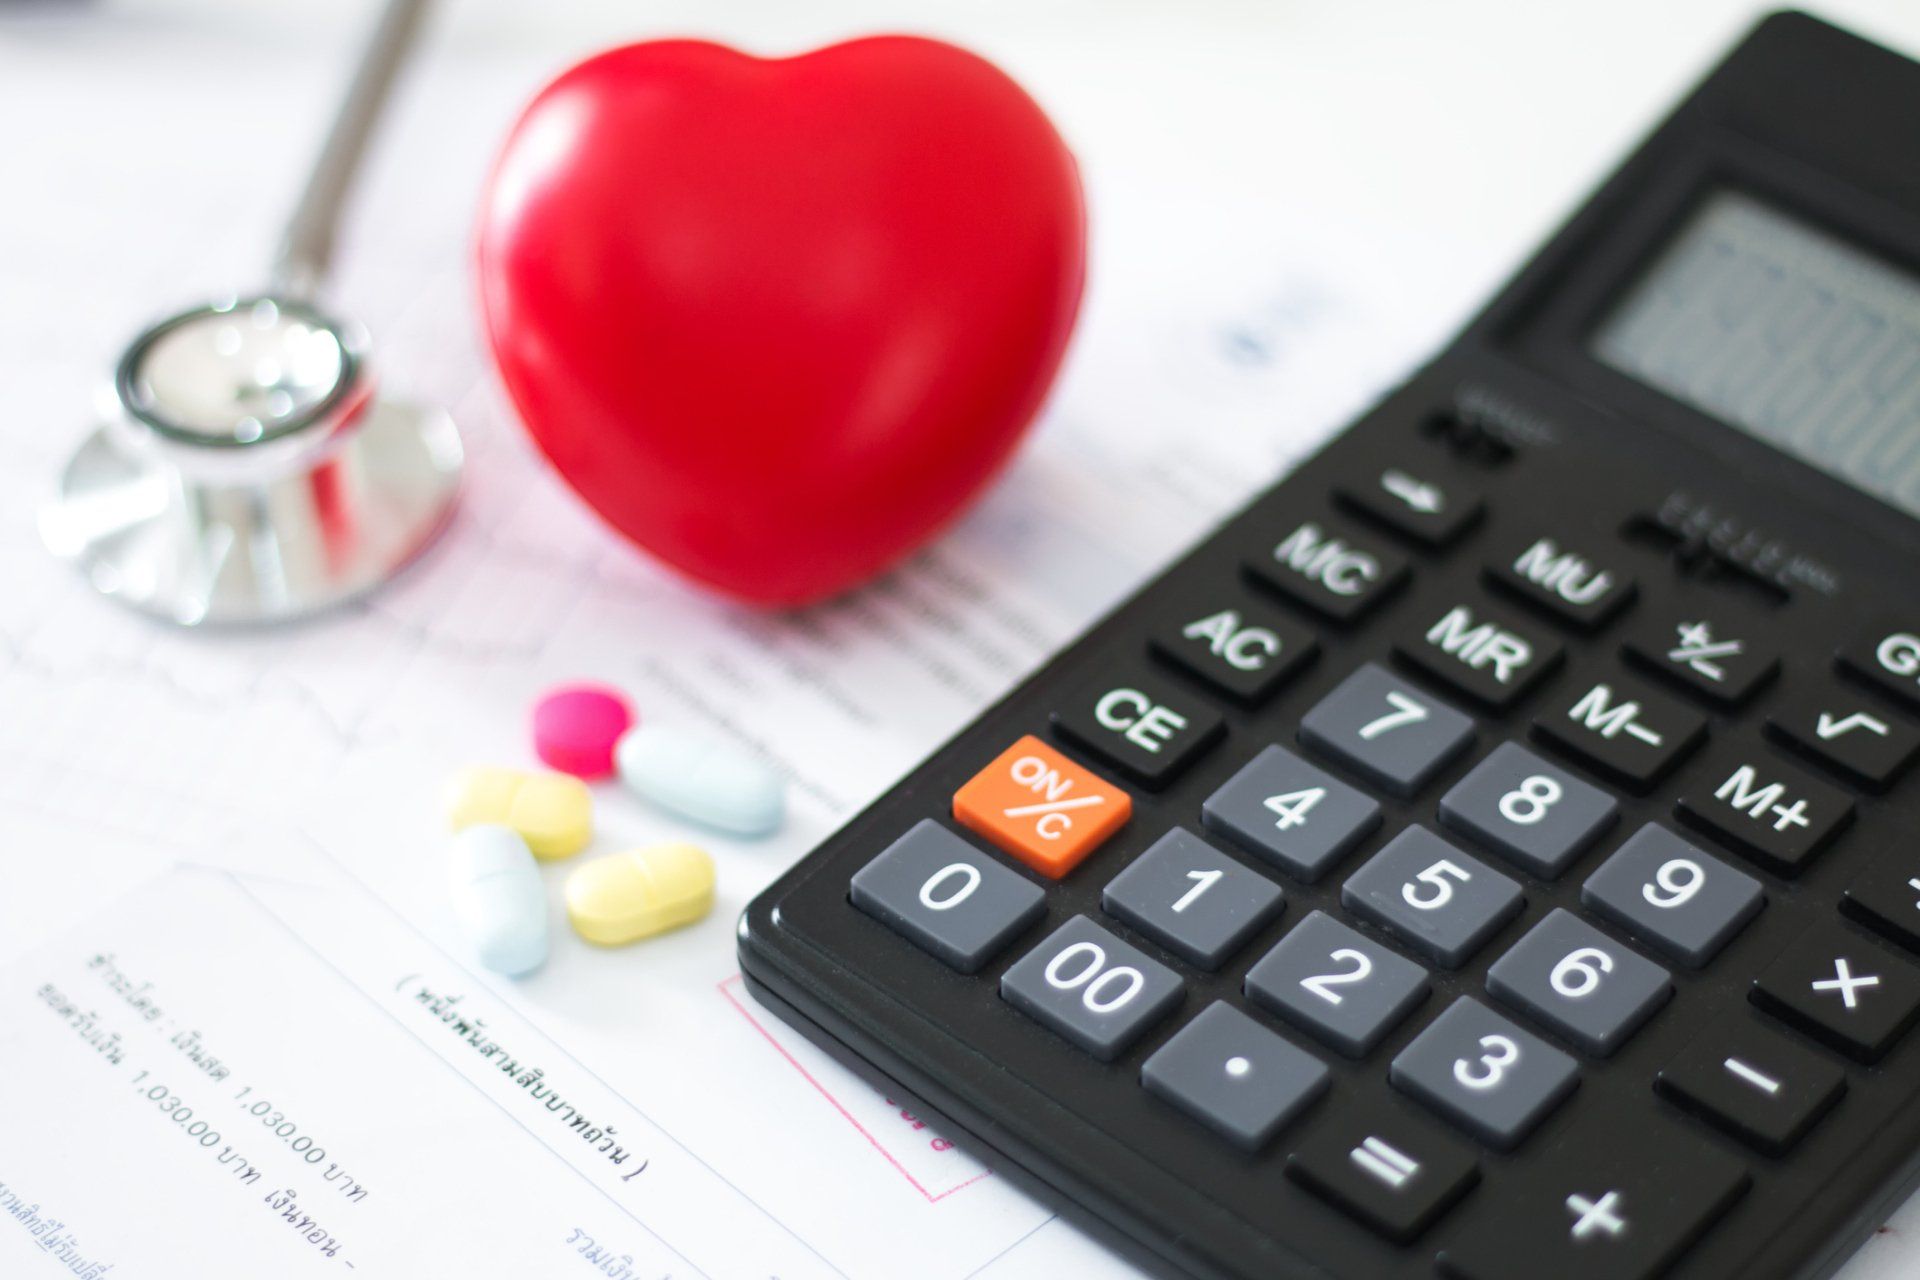 Cost Of Health Care - Fort Lauderdale, FL - Menéndez Law Firm